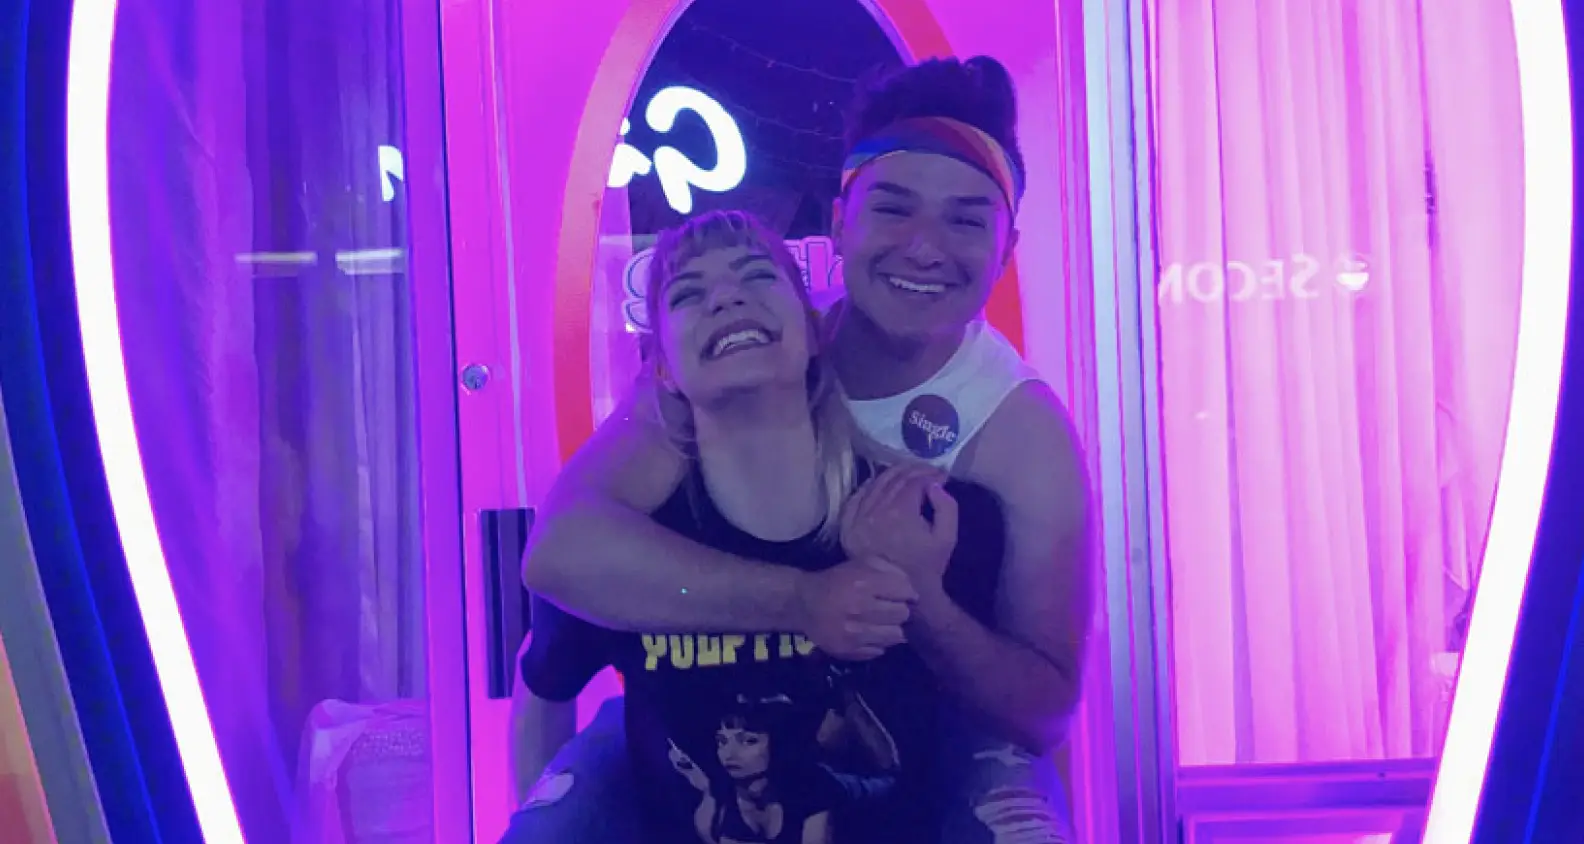 Two people smiling and hugging with a pink and purple background